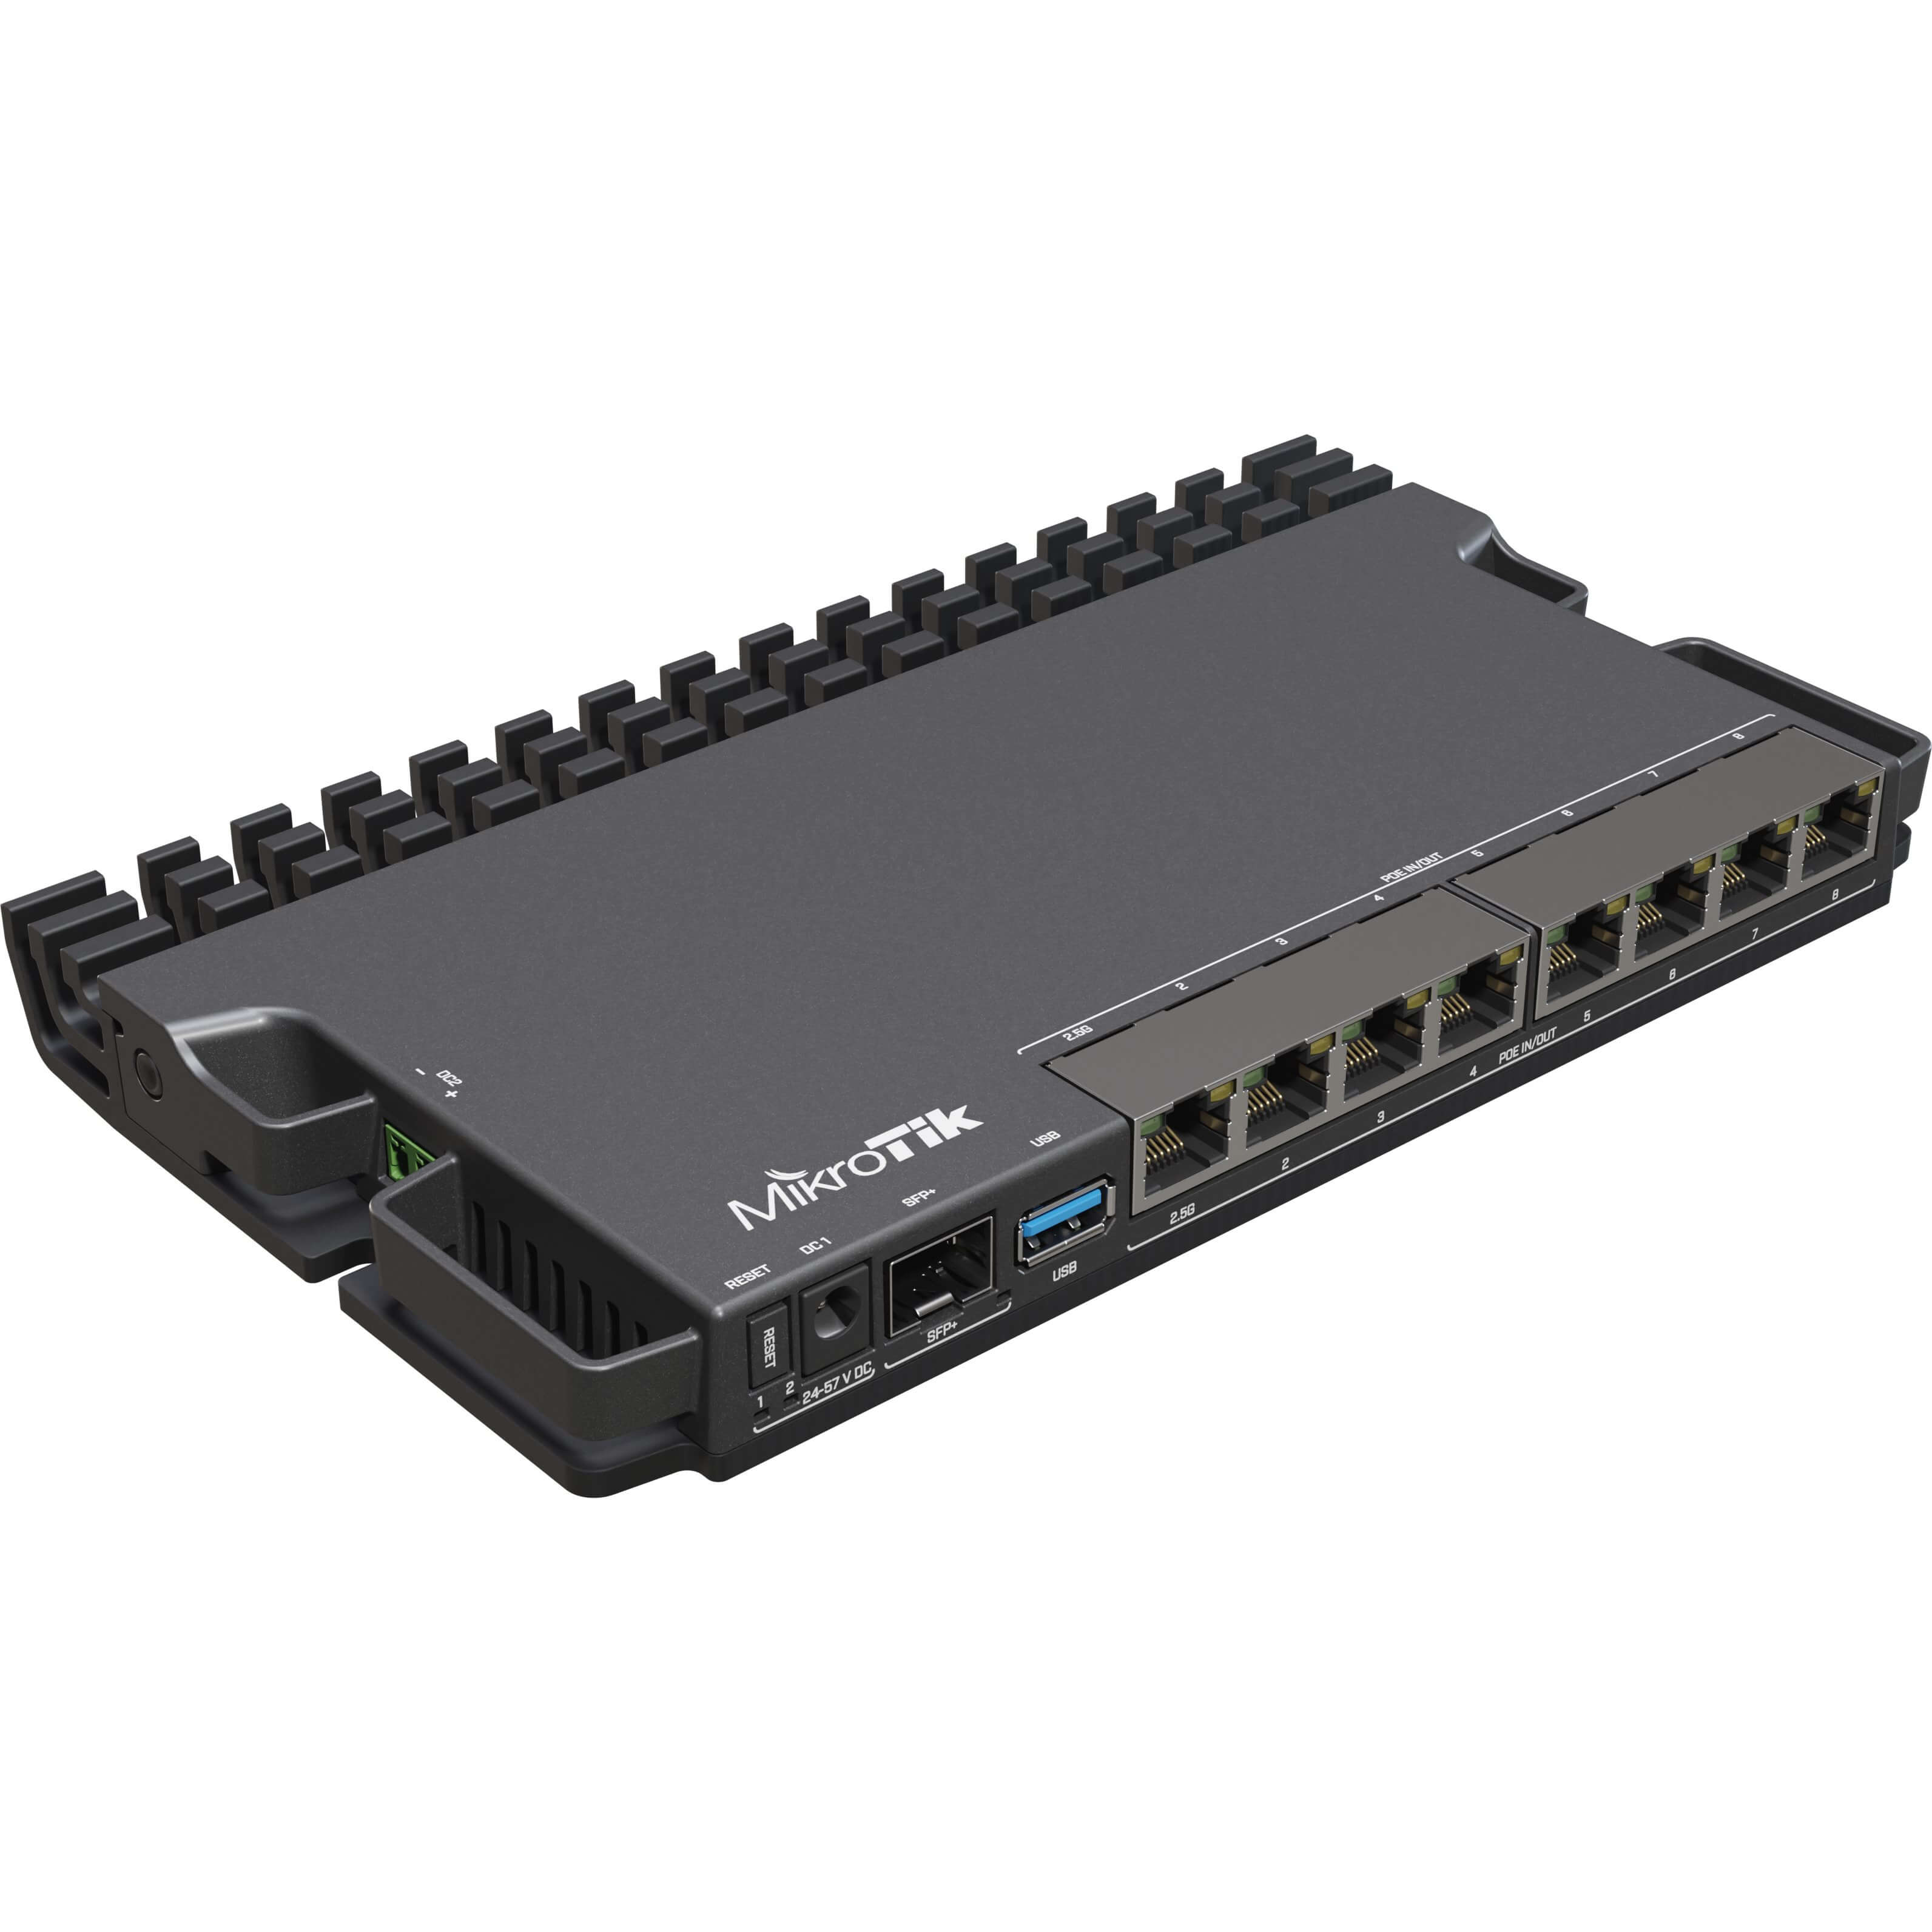   Routeurs  pro   Routeur 1x 2.5Giga 7x Giga PoE 1xSFP+ 5009UPr+S+IN RB5009UPR+S+IN